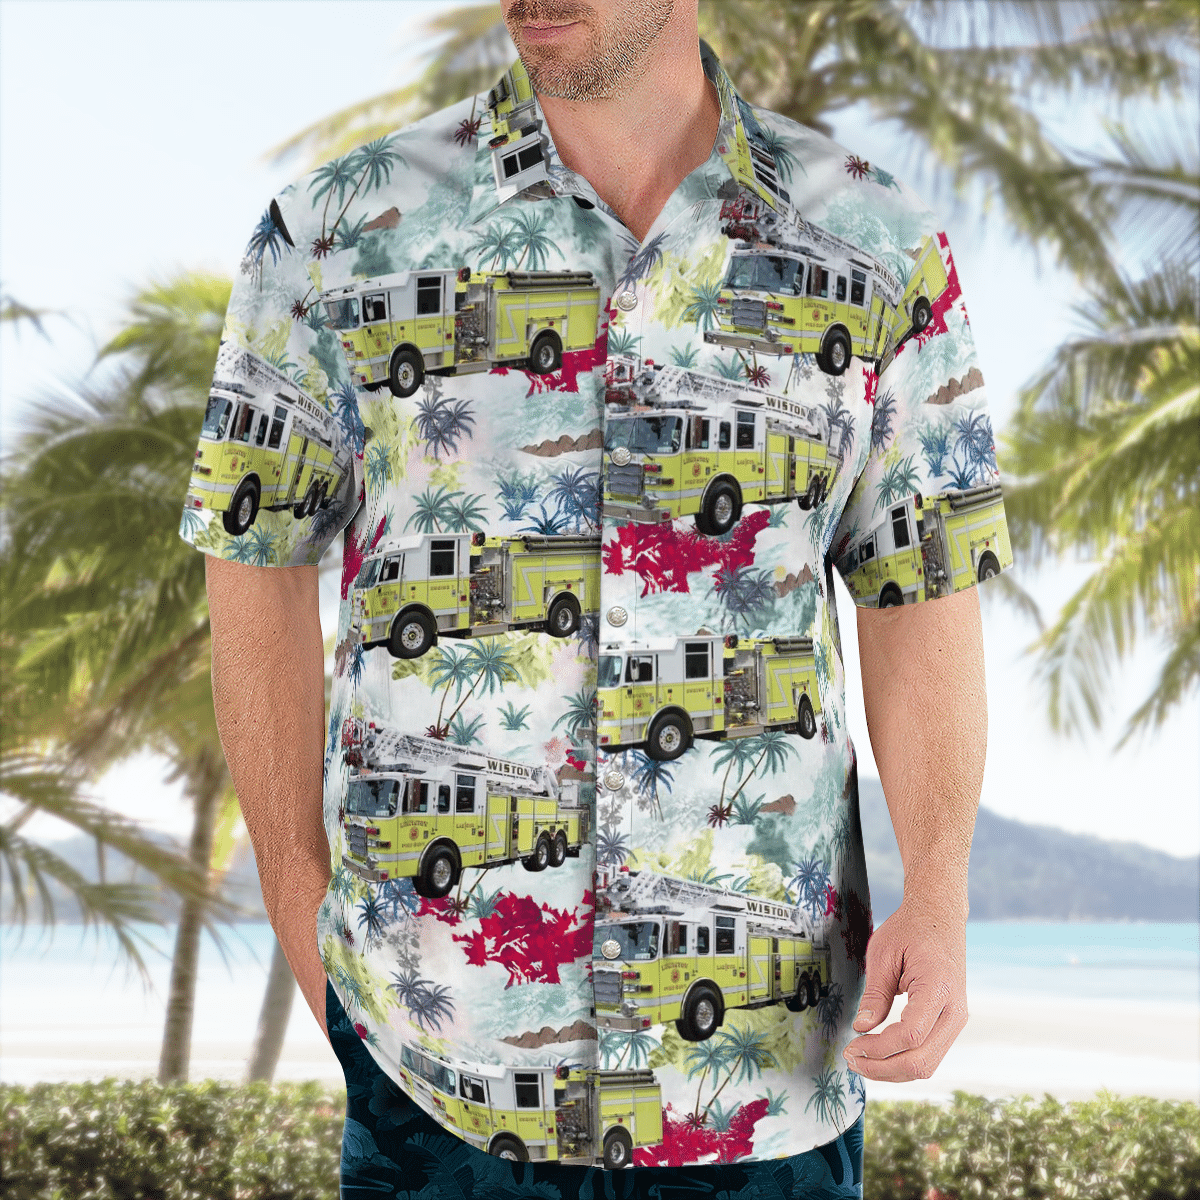 There are several styles of beach and Hawaiian shorts and tops to choose from 37